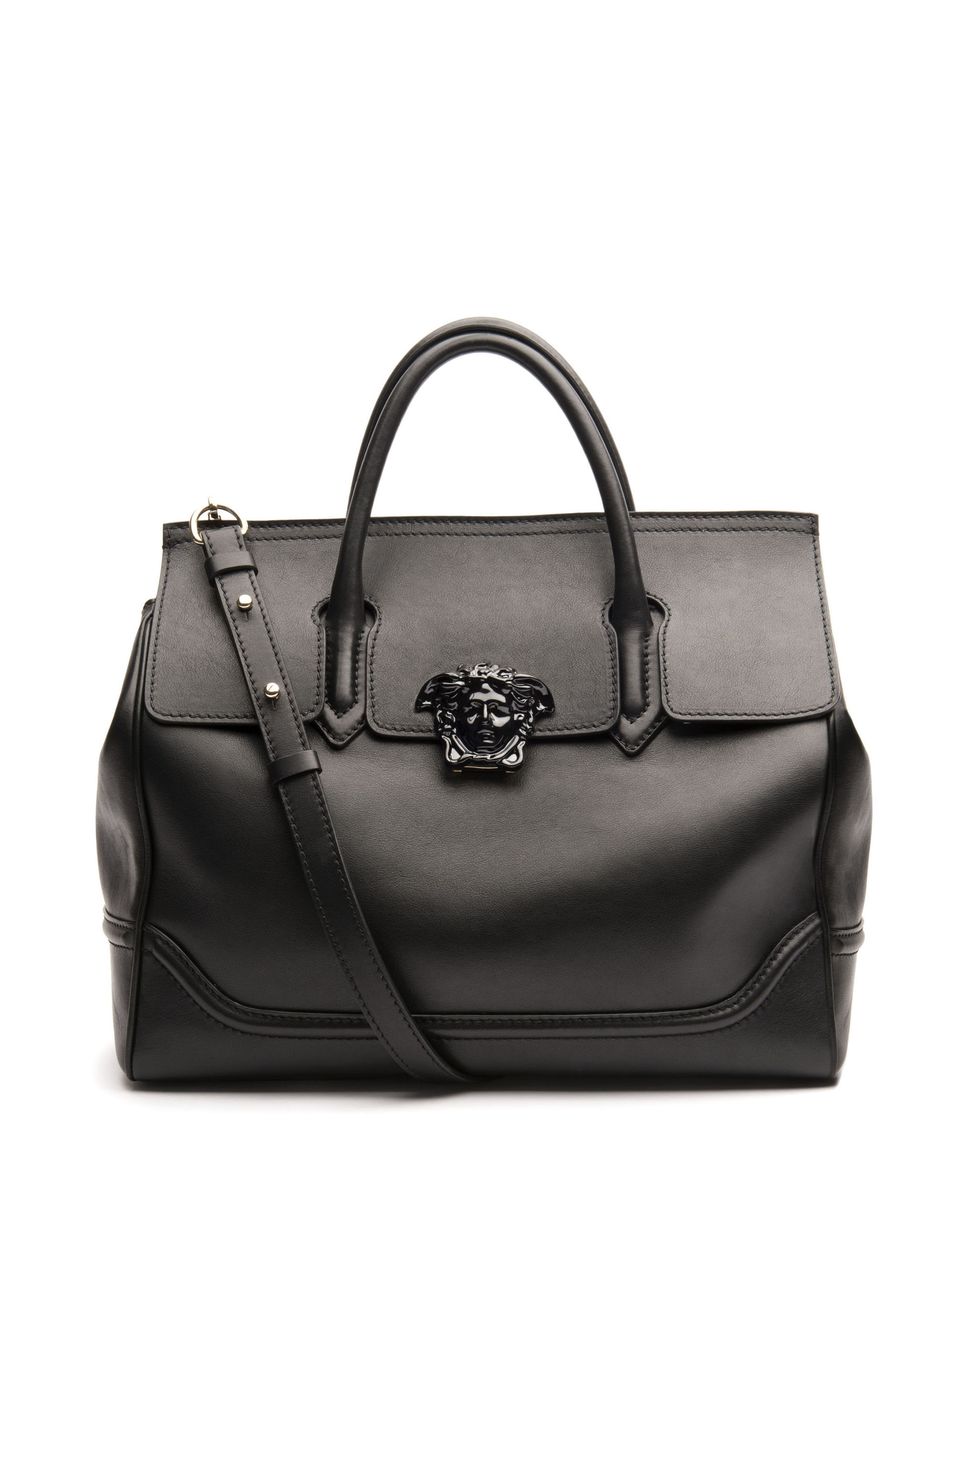 <p>No need to check luggage for a two-day trip; it's the <em>perfect </em>carry-on for an overnight jaunt, as well as a chic tote for an afternoon of business meetings or leisurely shopping. <em>Versace Palazzo Empire Leather Bag, $3,295, <a href="http://us.versace.com/Palazzo-Empire-Leather-Bag/400_DBFF453-DSTVT,en_US,pd.html&cgid=142500#!%3Fprefn1%3Dsale%26prefv1%3Dfalse%26i%3D7%26color%3DKNJOC" target="_blank"><strong>versace.com</strong></a>.</em></p>